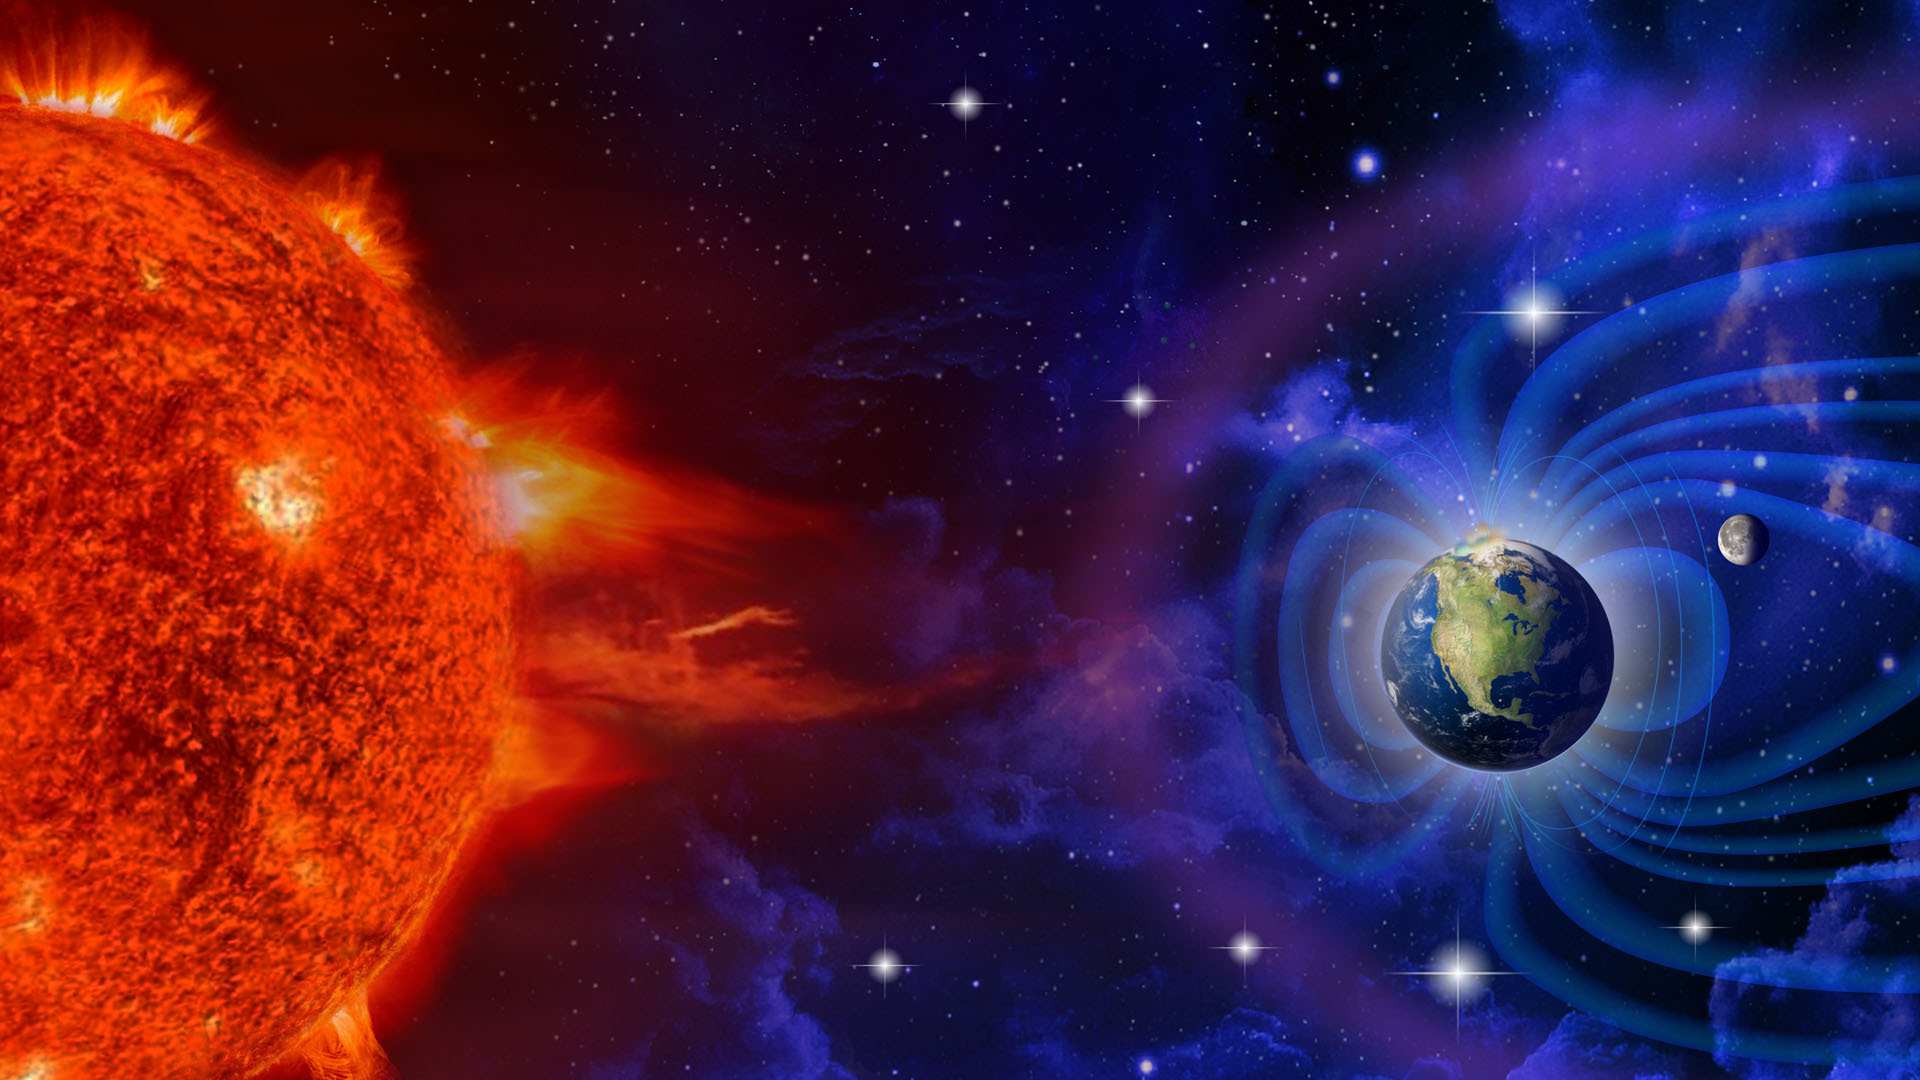 An illustration shows the Sun in red on the left and Earth and the Moon on the right, with blue magnetic field lines shown around Earth.